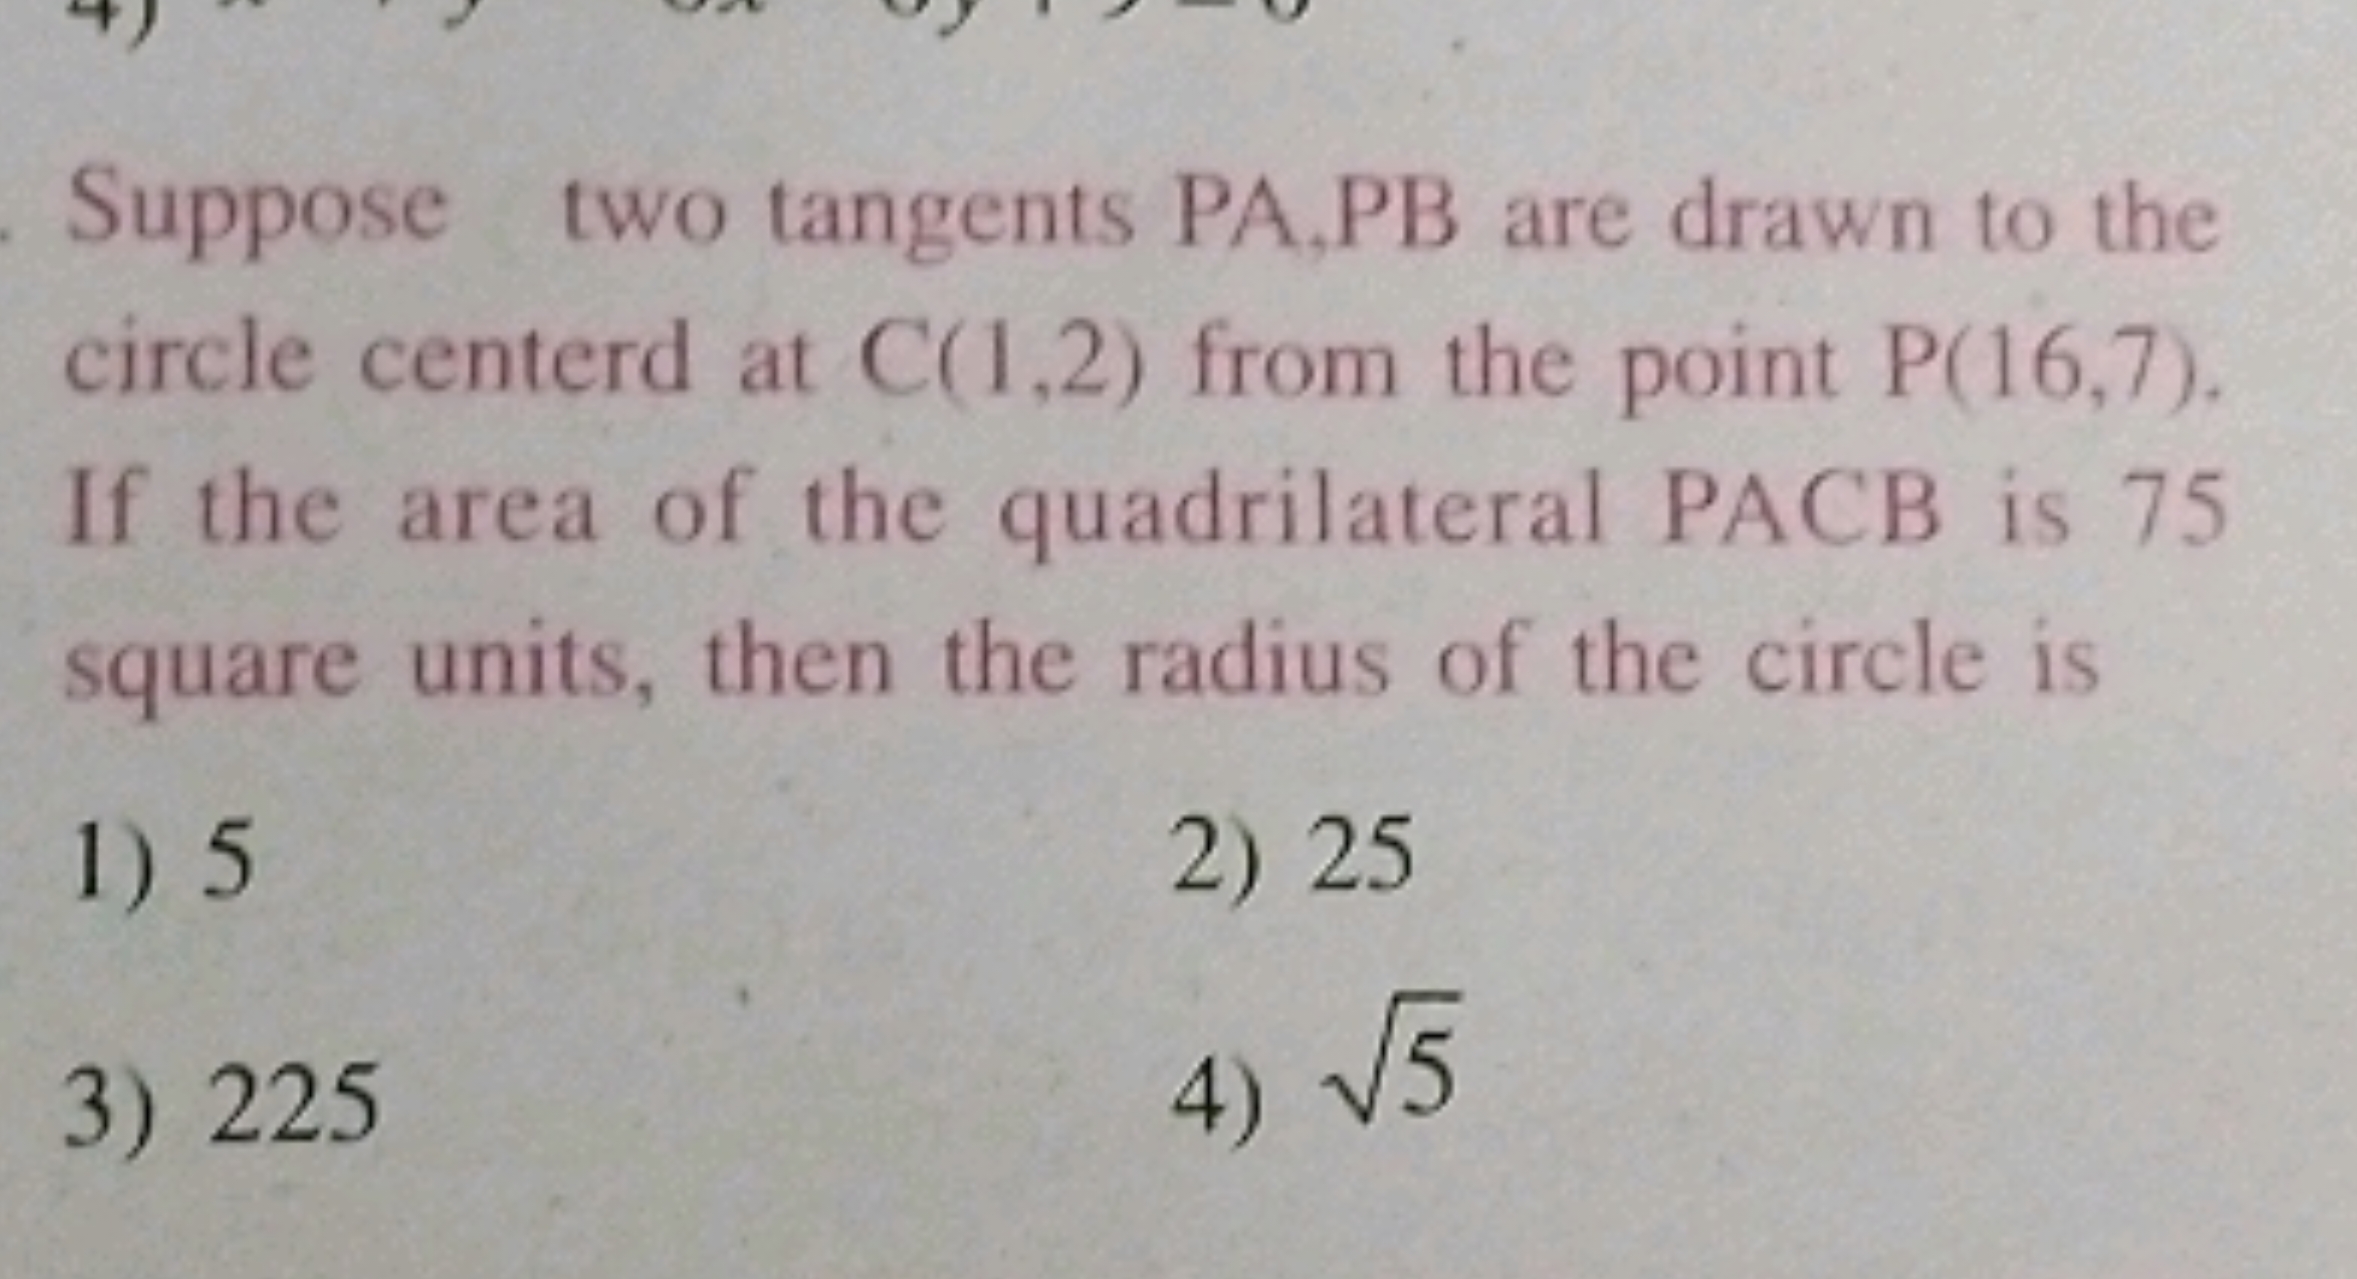 Suppose two tangents PA,PB are drawn to the circle centerd at C(1,2) f